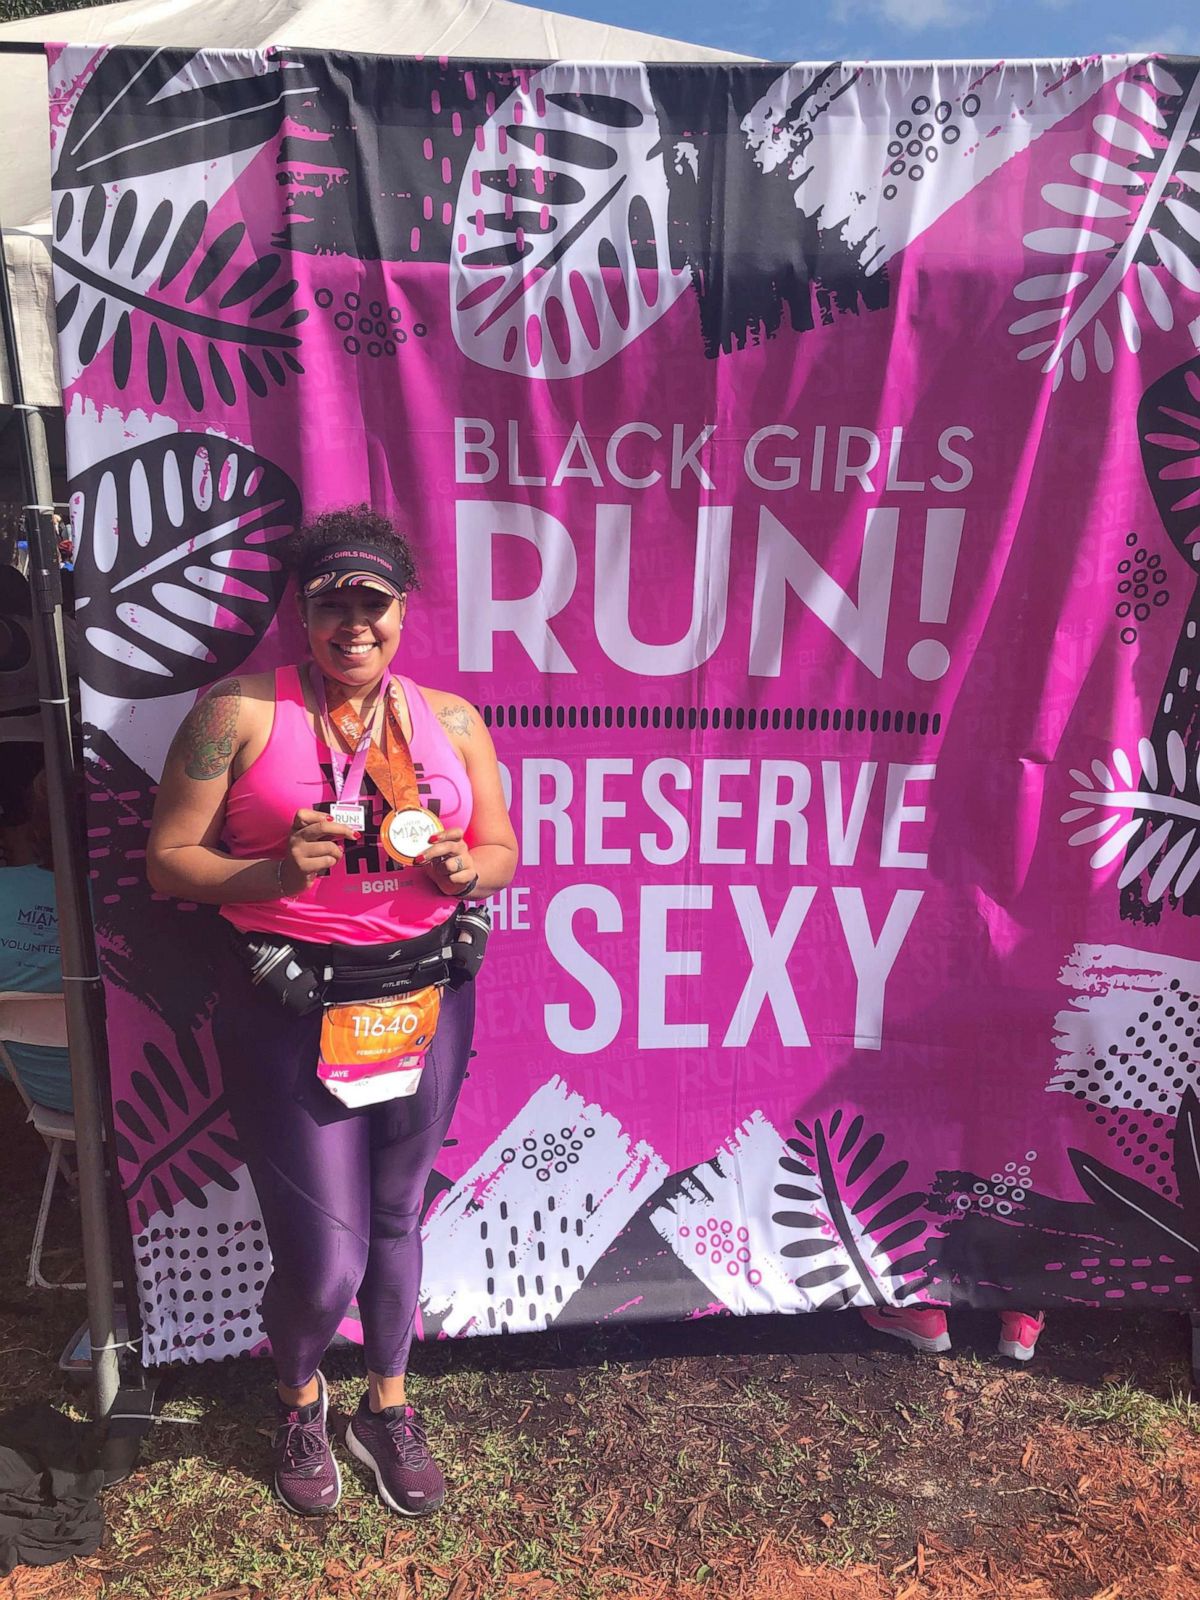 Virginia Woman Lost 115 Pounds and Leads Organization Encouraging Black Women to Run More